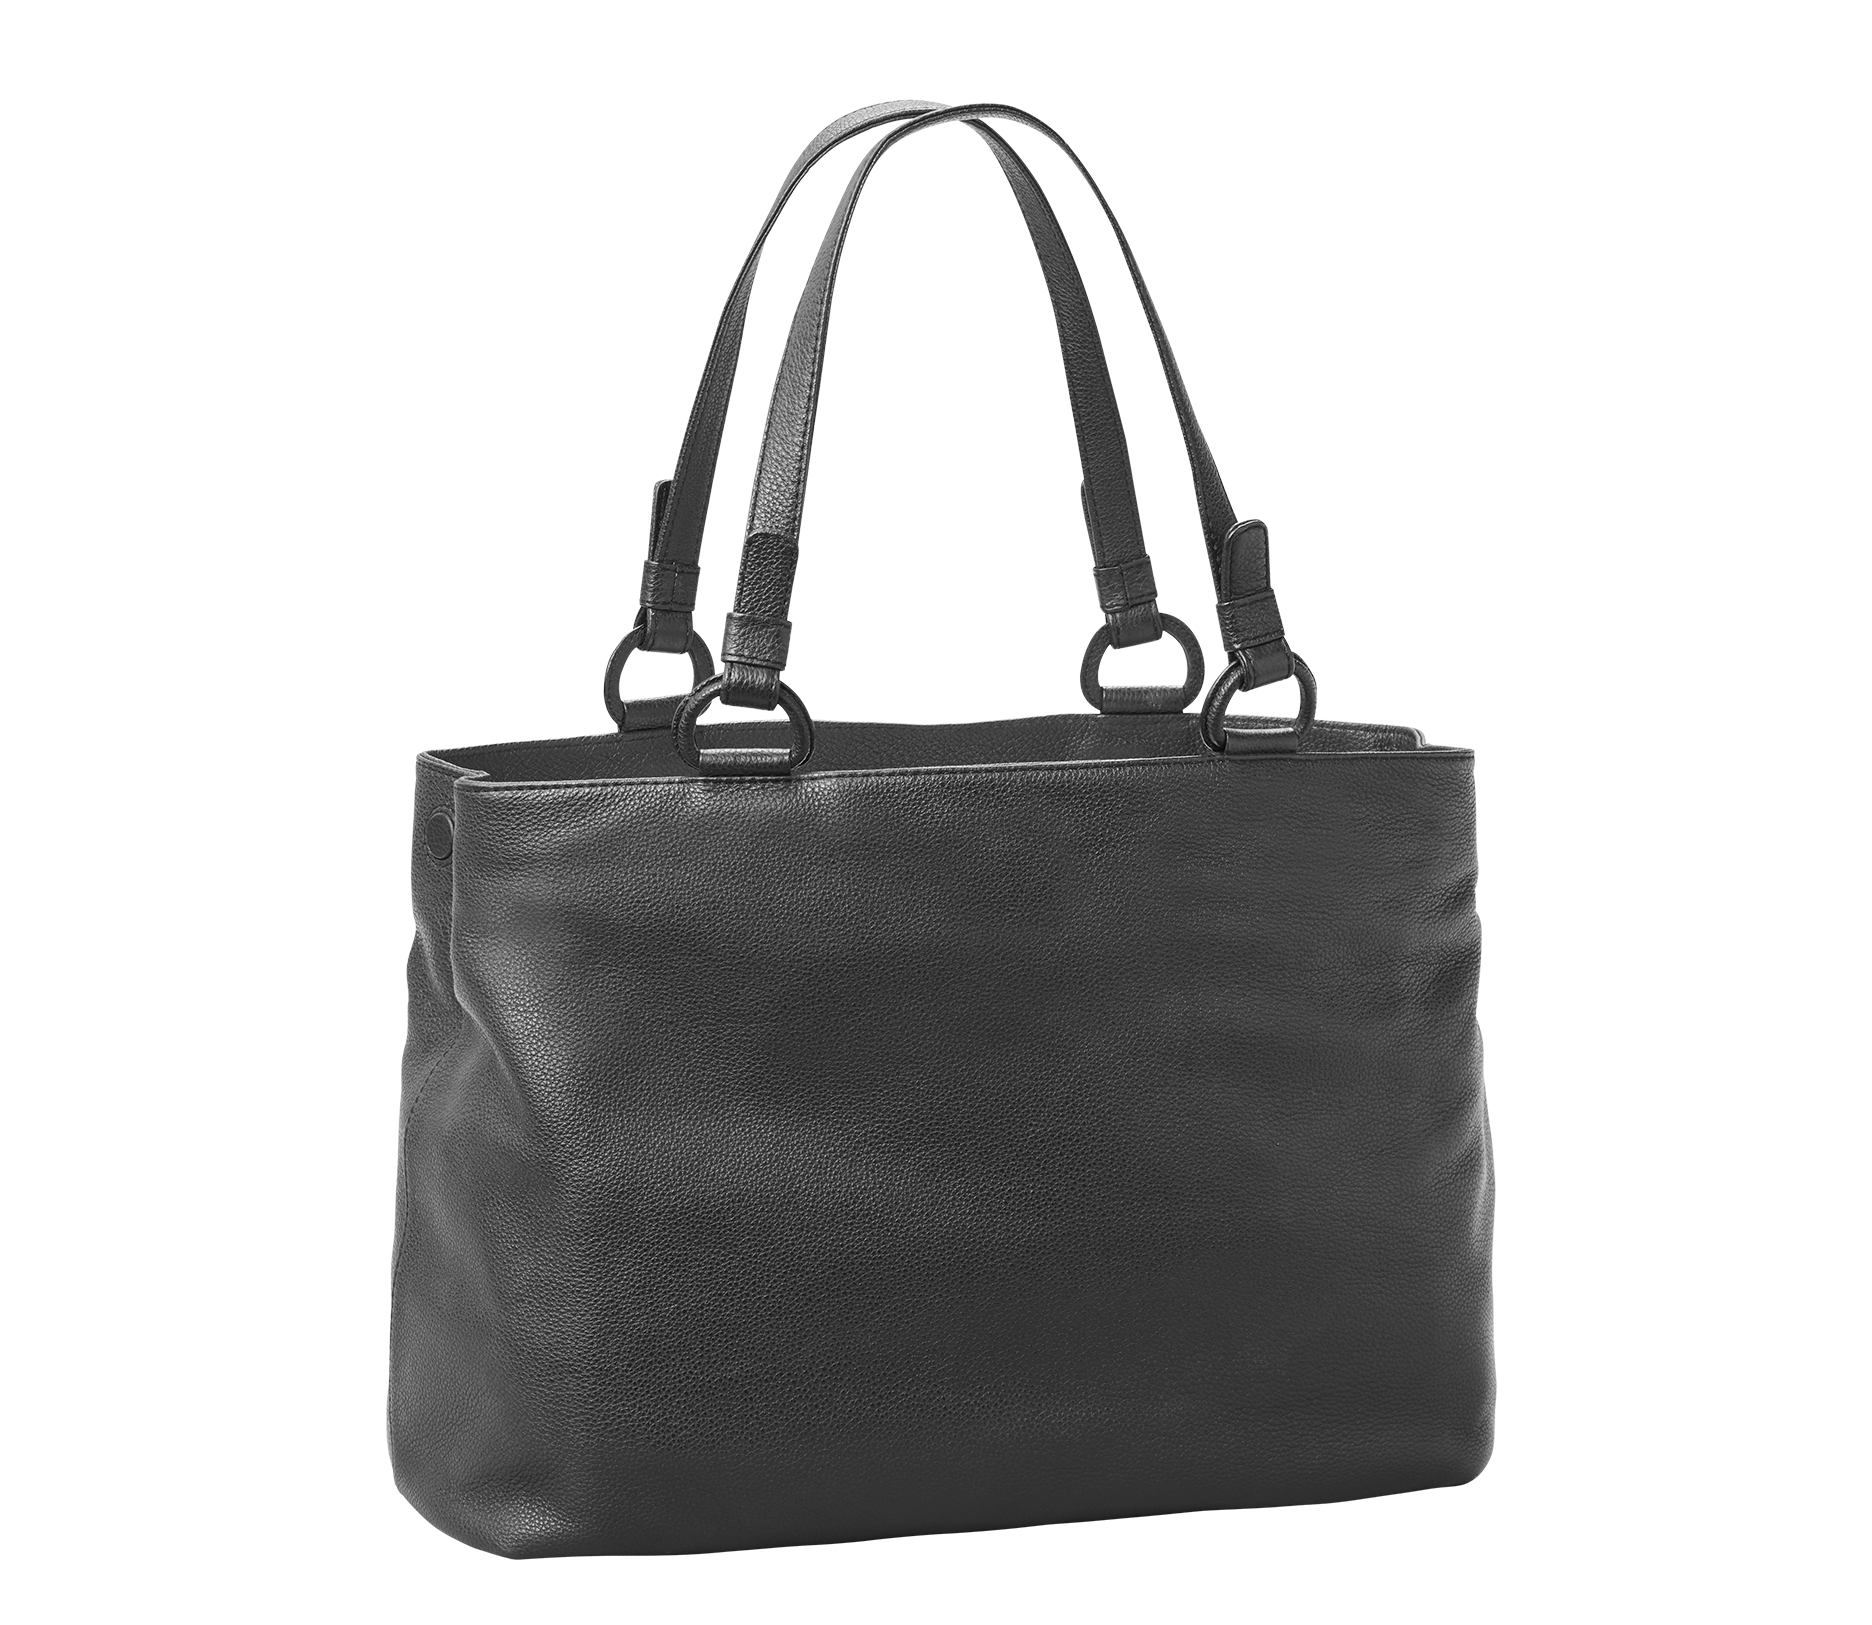 Marcella Leather Travel Tote in Black